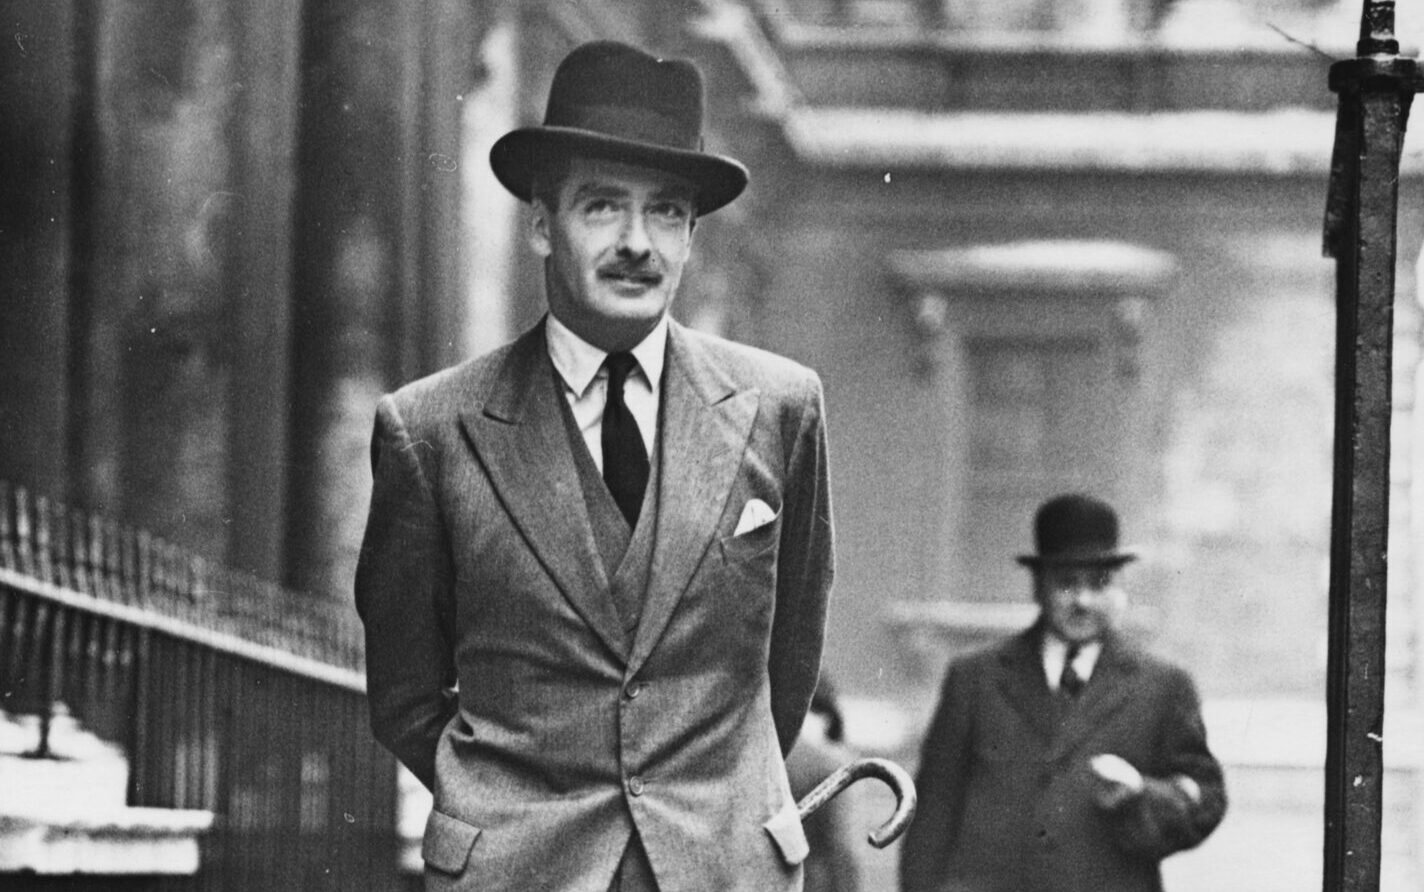 Foreign Secretary Sir Anthony Eden arriving for a Cabinet Meeting at 10 Downing Street, London, October 6th 1937. (Photo by Keystone/Hulton Archive/Getty Images)